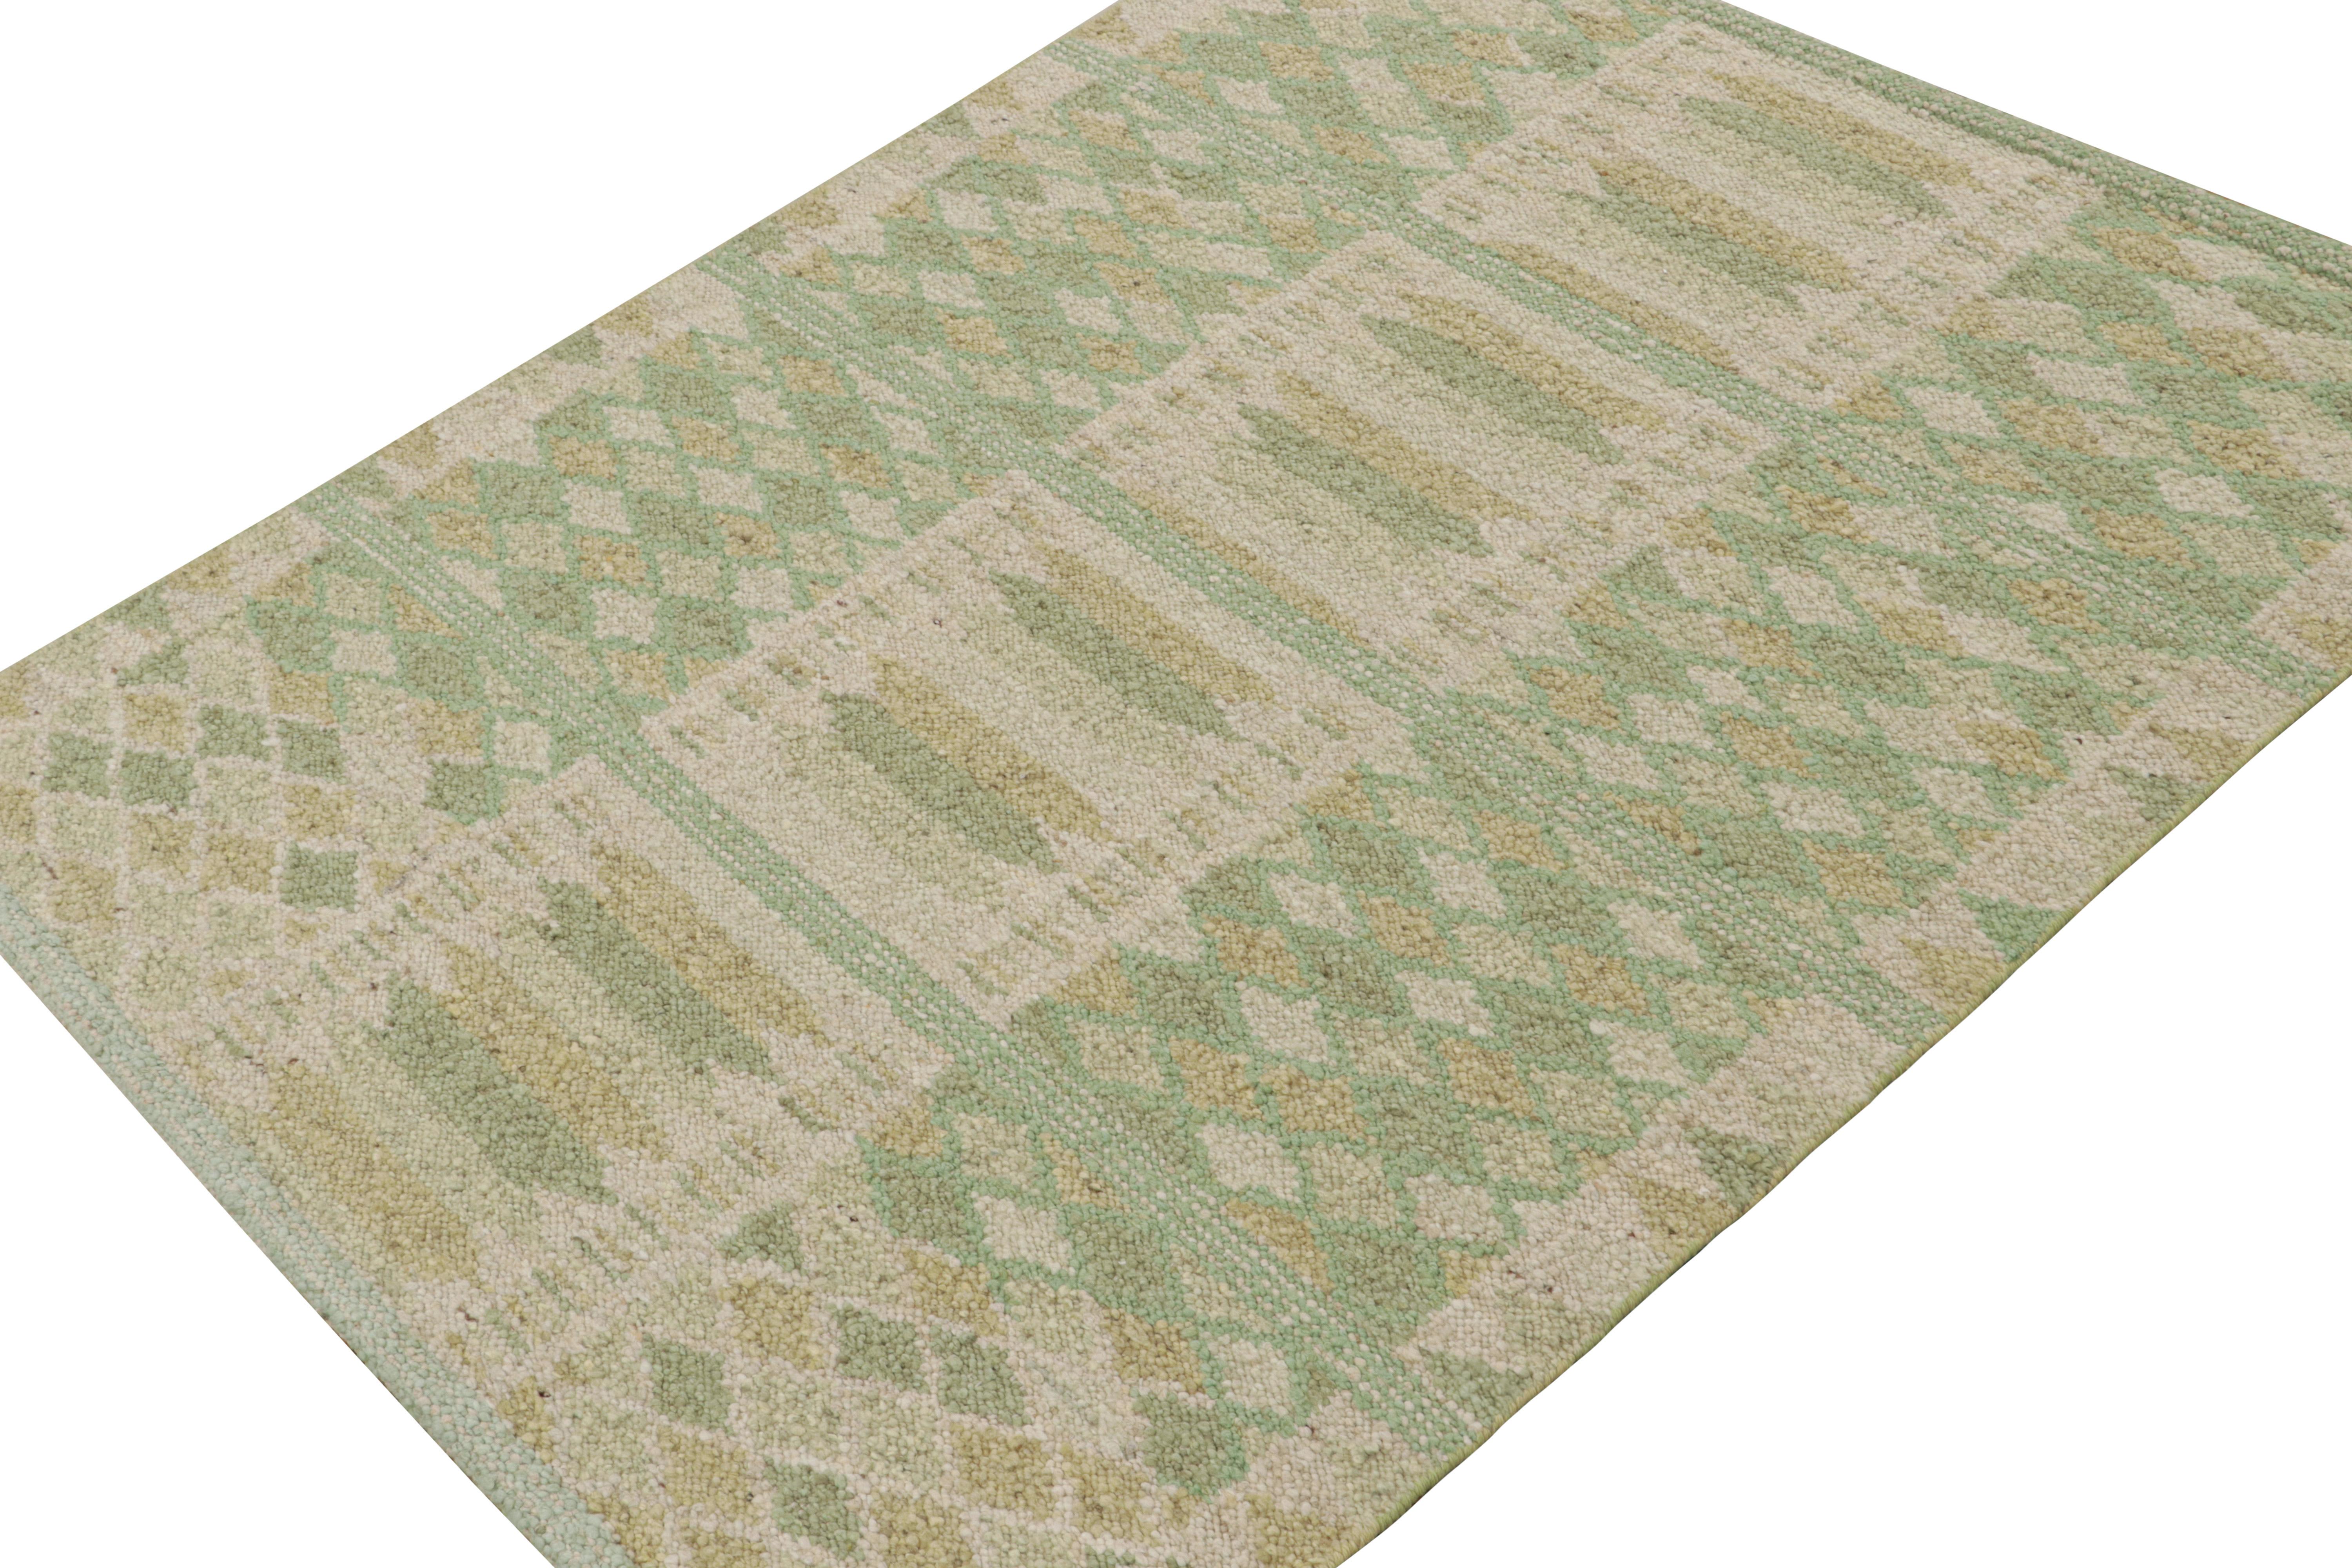 Indian Rug & Kilim’s Scandinavian Style Kilim in Green, Gold & Cream Geometric Patterns For Sale